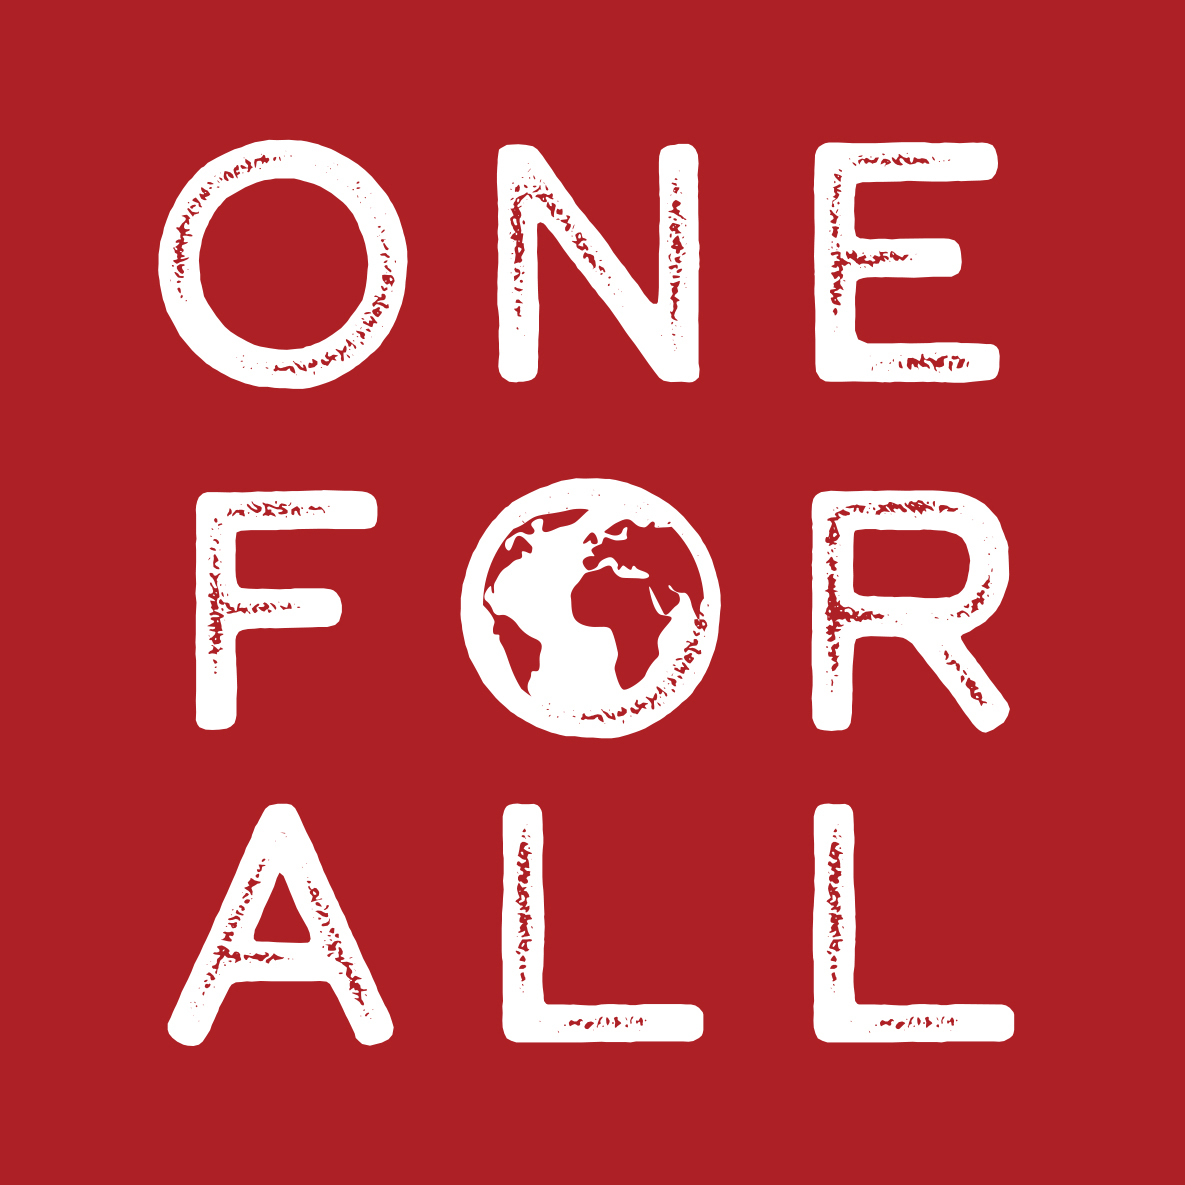 All For One & One For All?